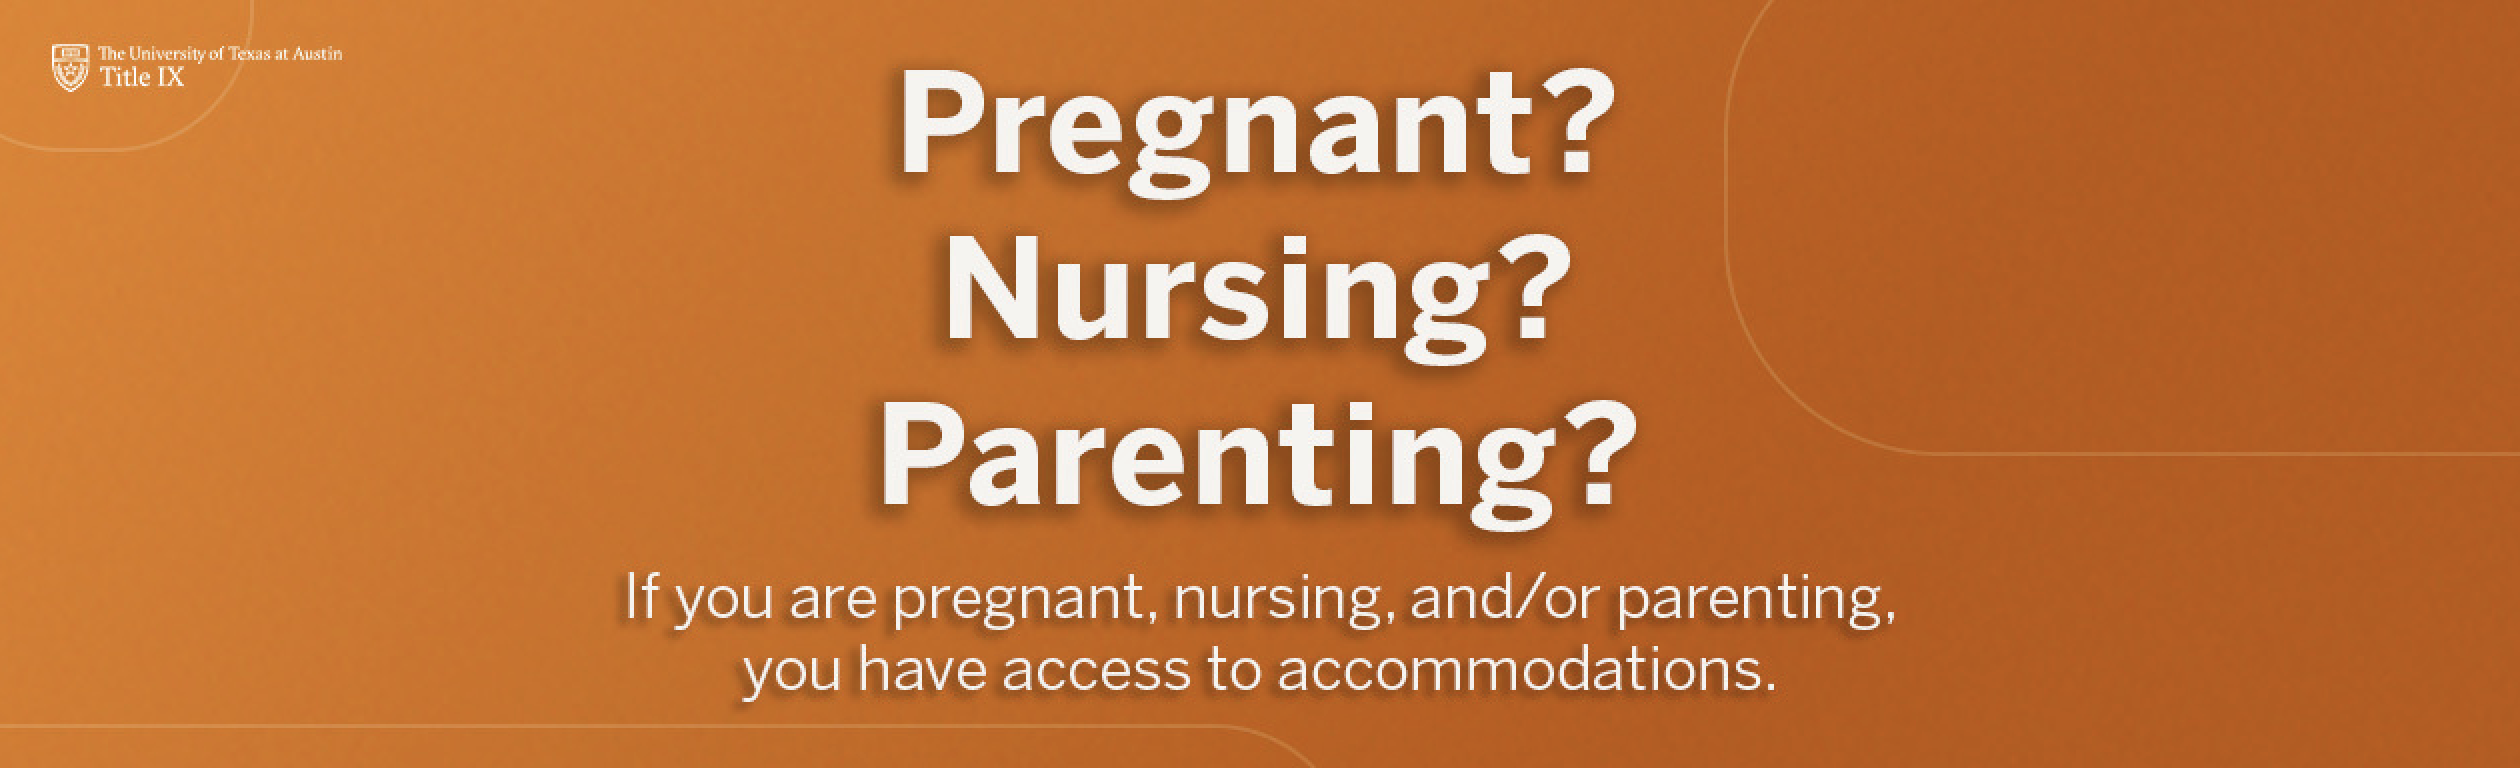 If you are pregnant, nursing, and/or parenting, you have access to accommodations.